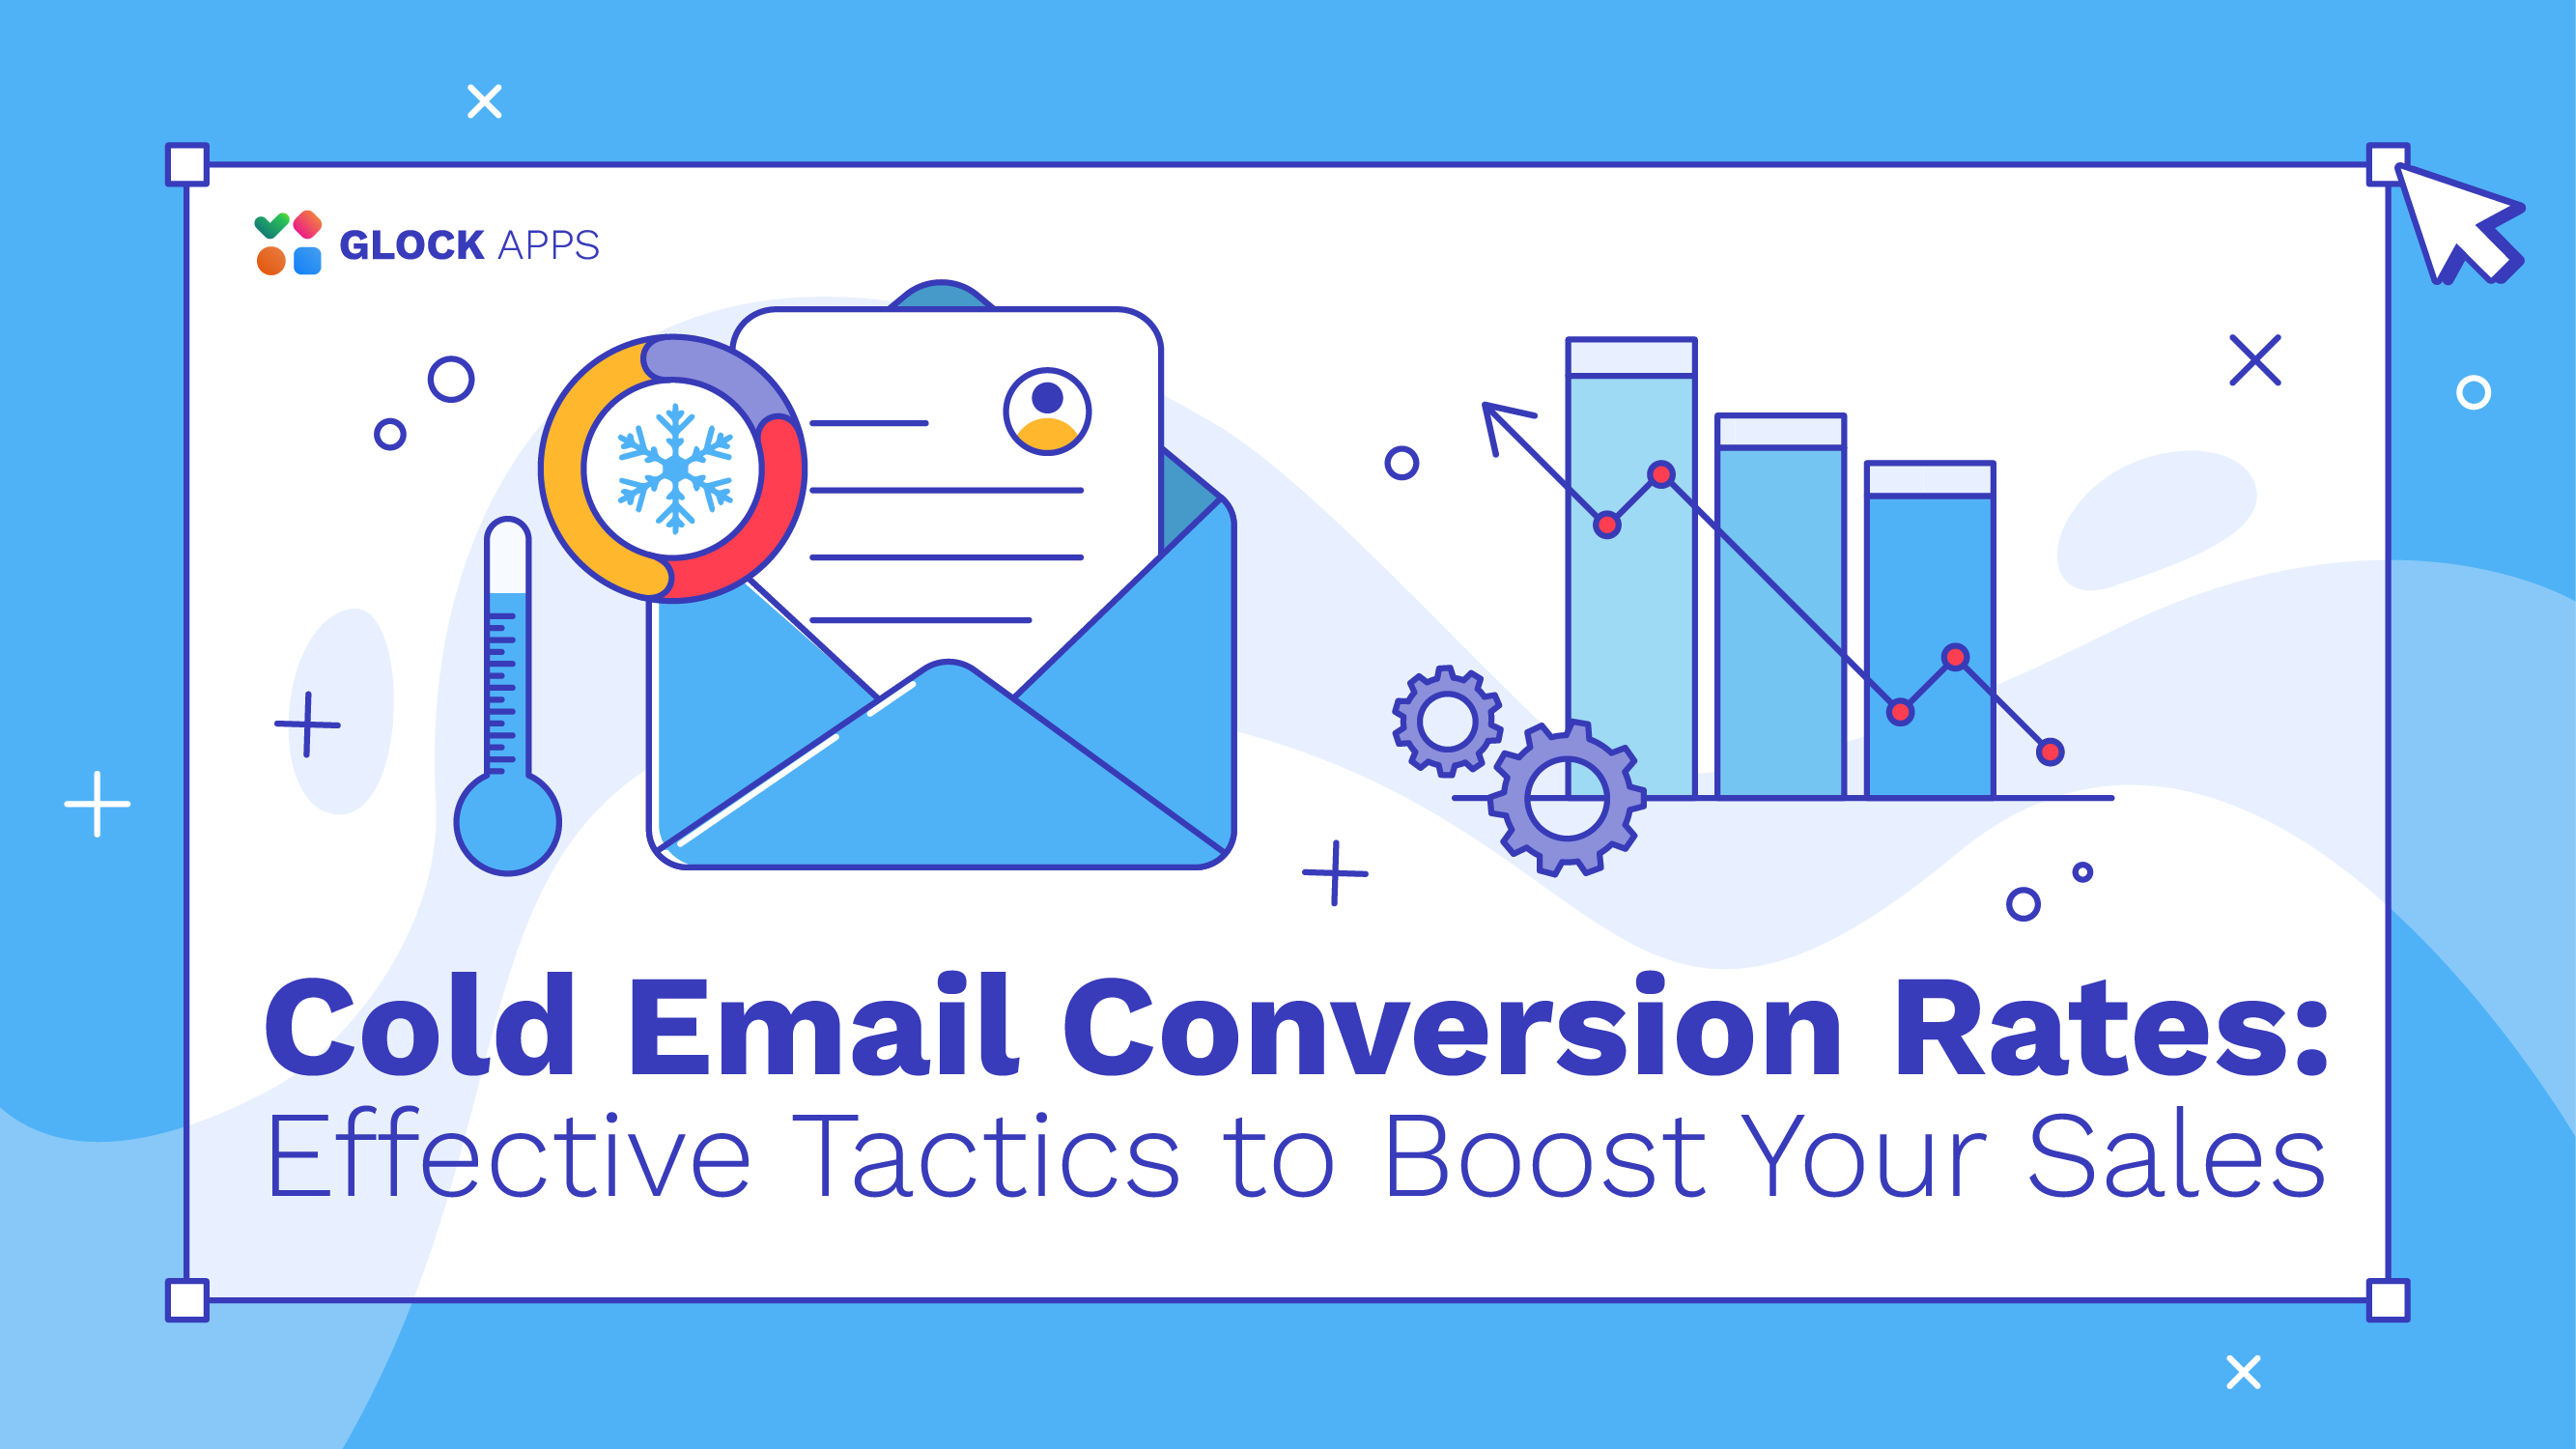 glockapps:-cold-email-conversion-rates:-effective-tactics-to-boost-your-sales